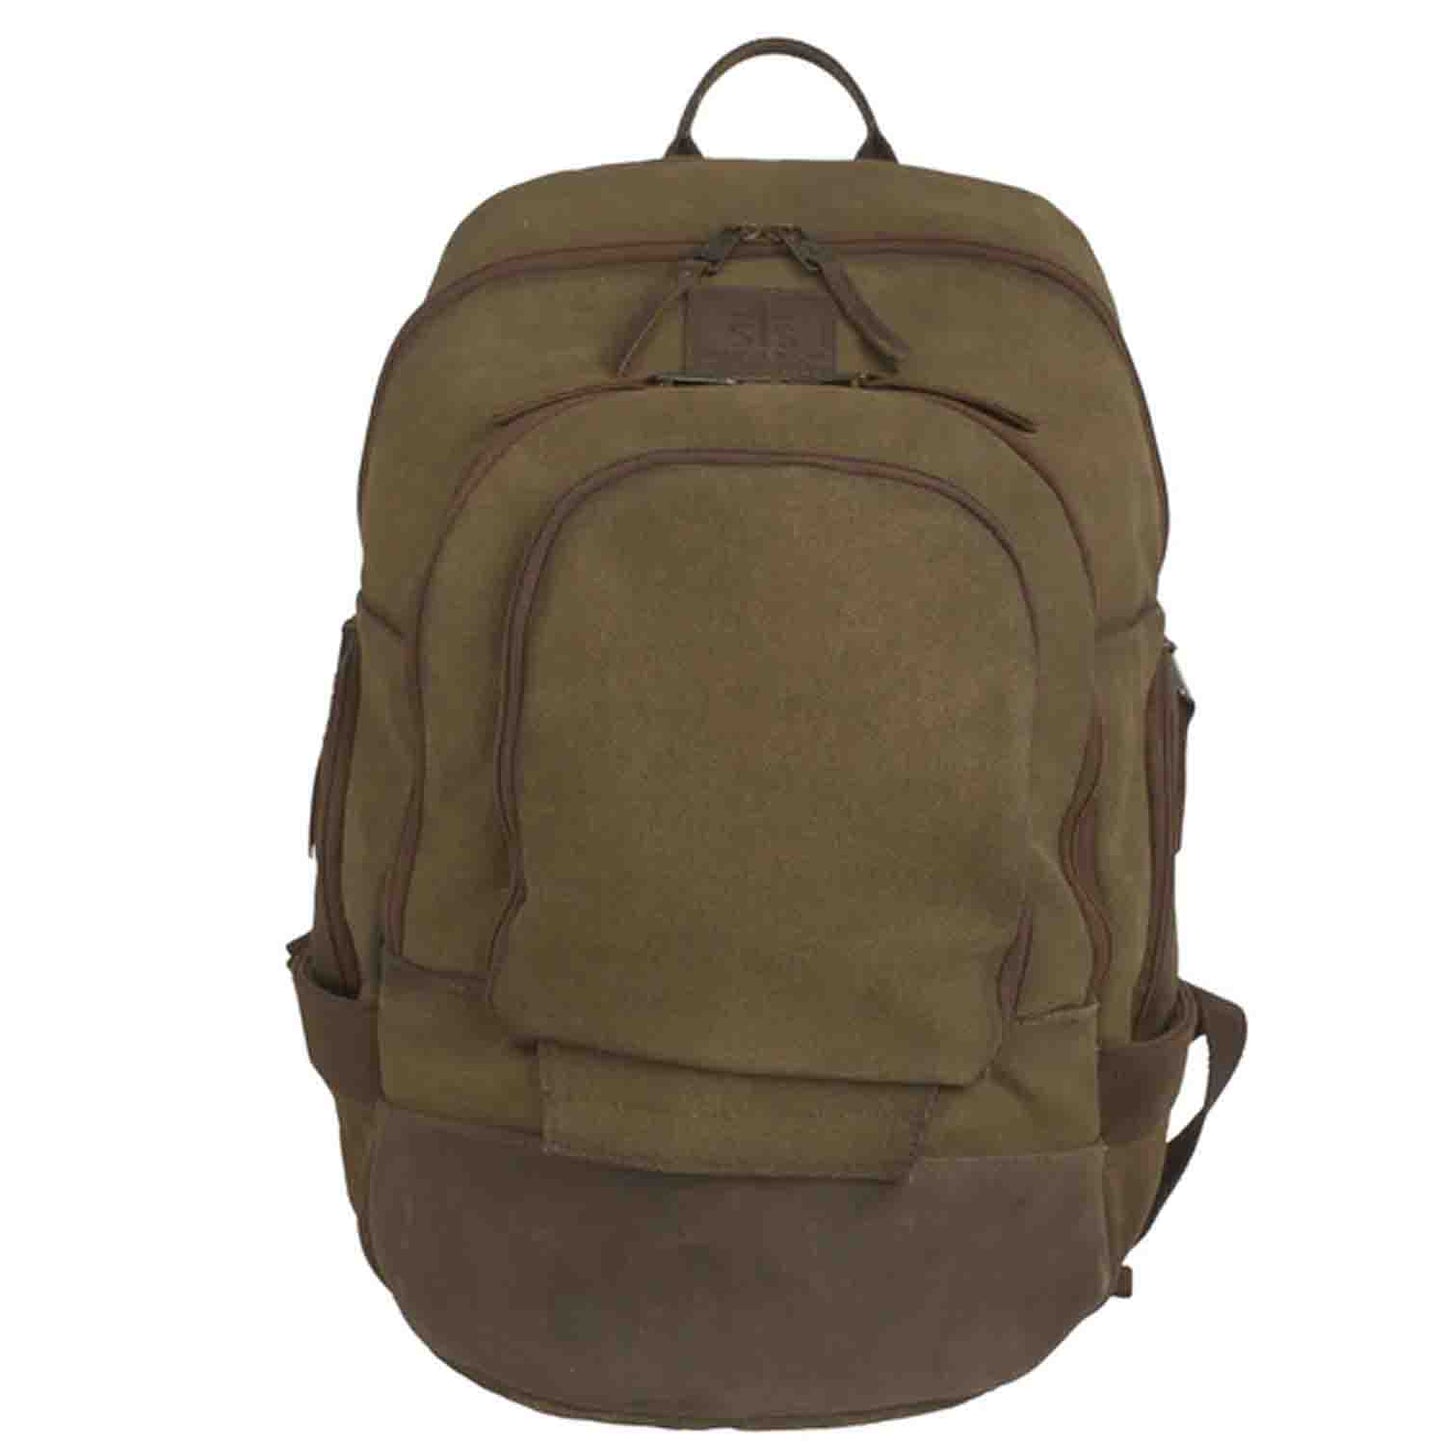 Trailblazer Cisco Backpack in Brown by STS Ranchwear